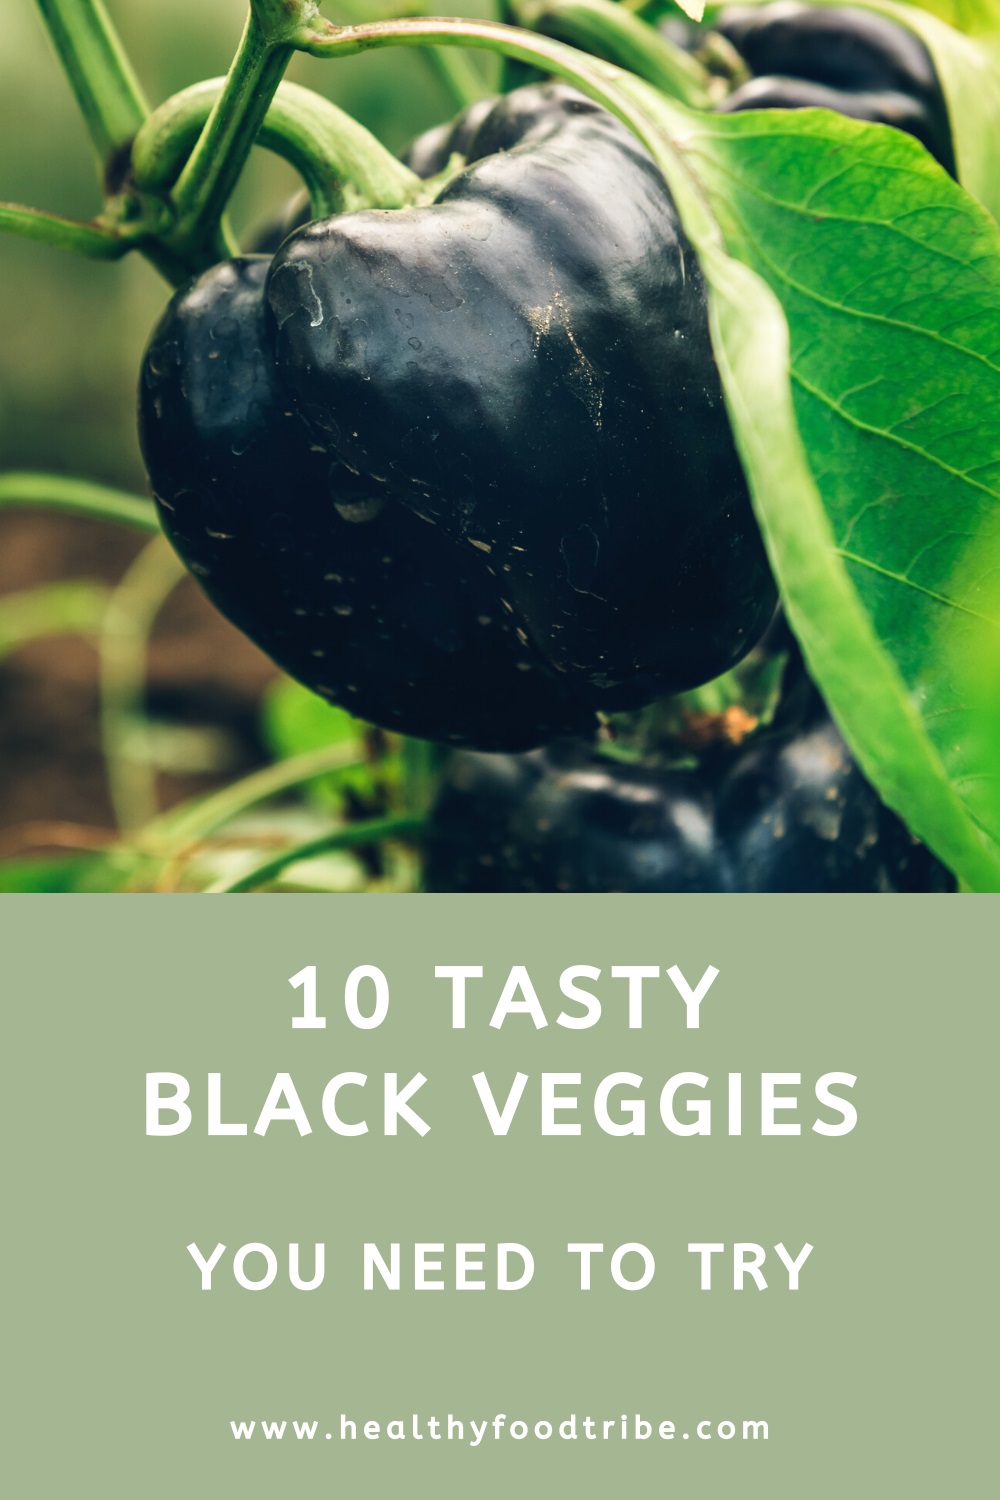 10 Black veggies you need to try